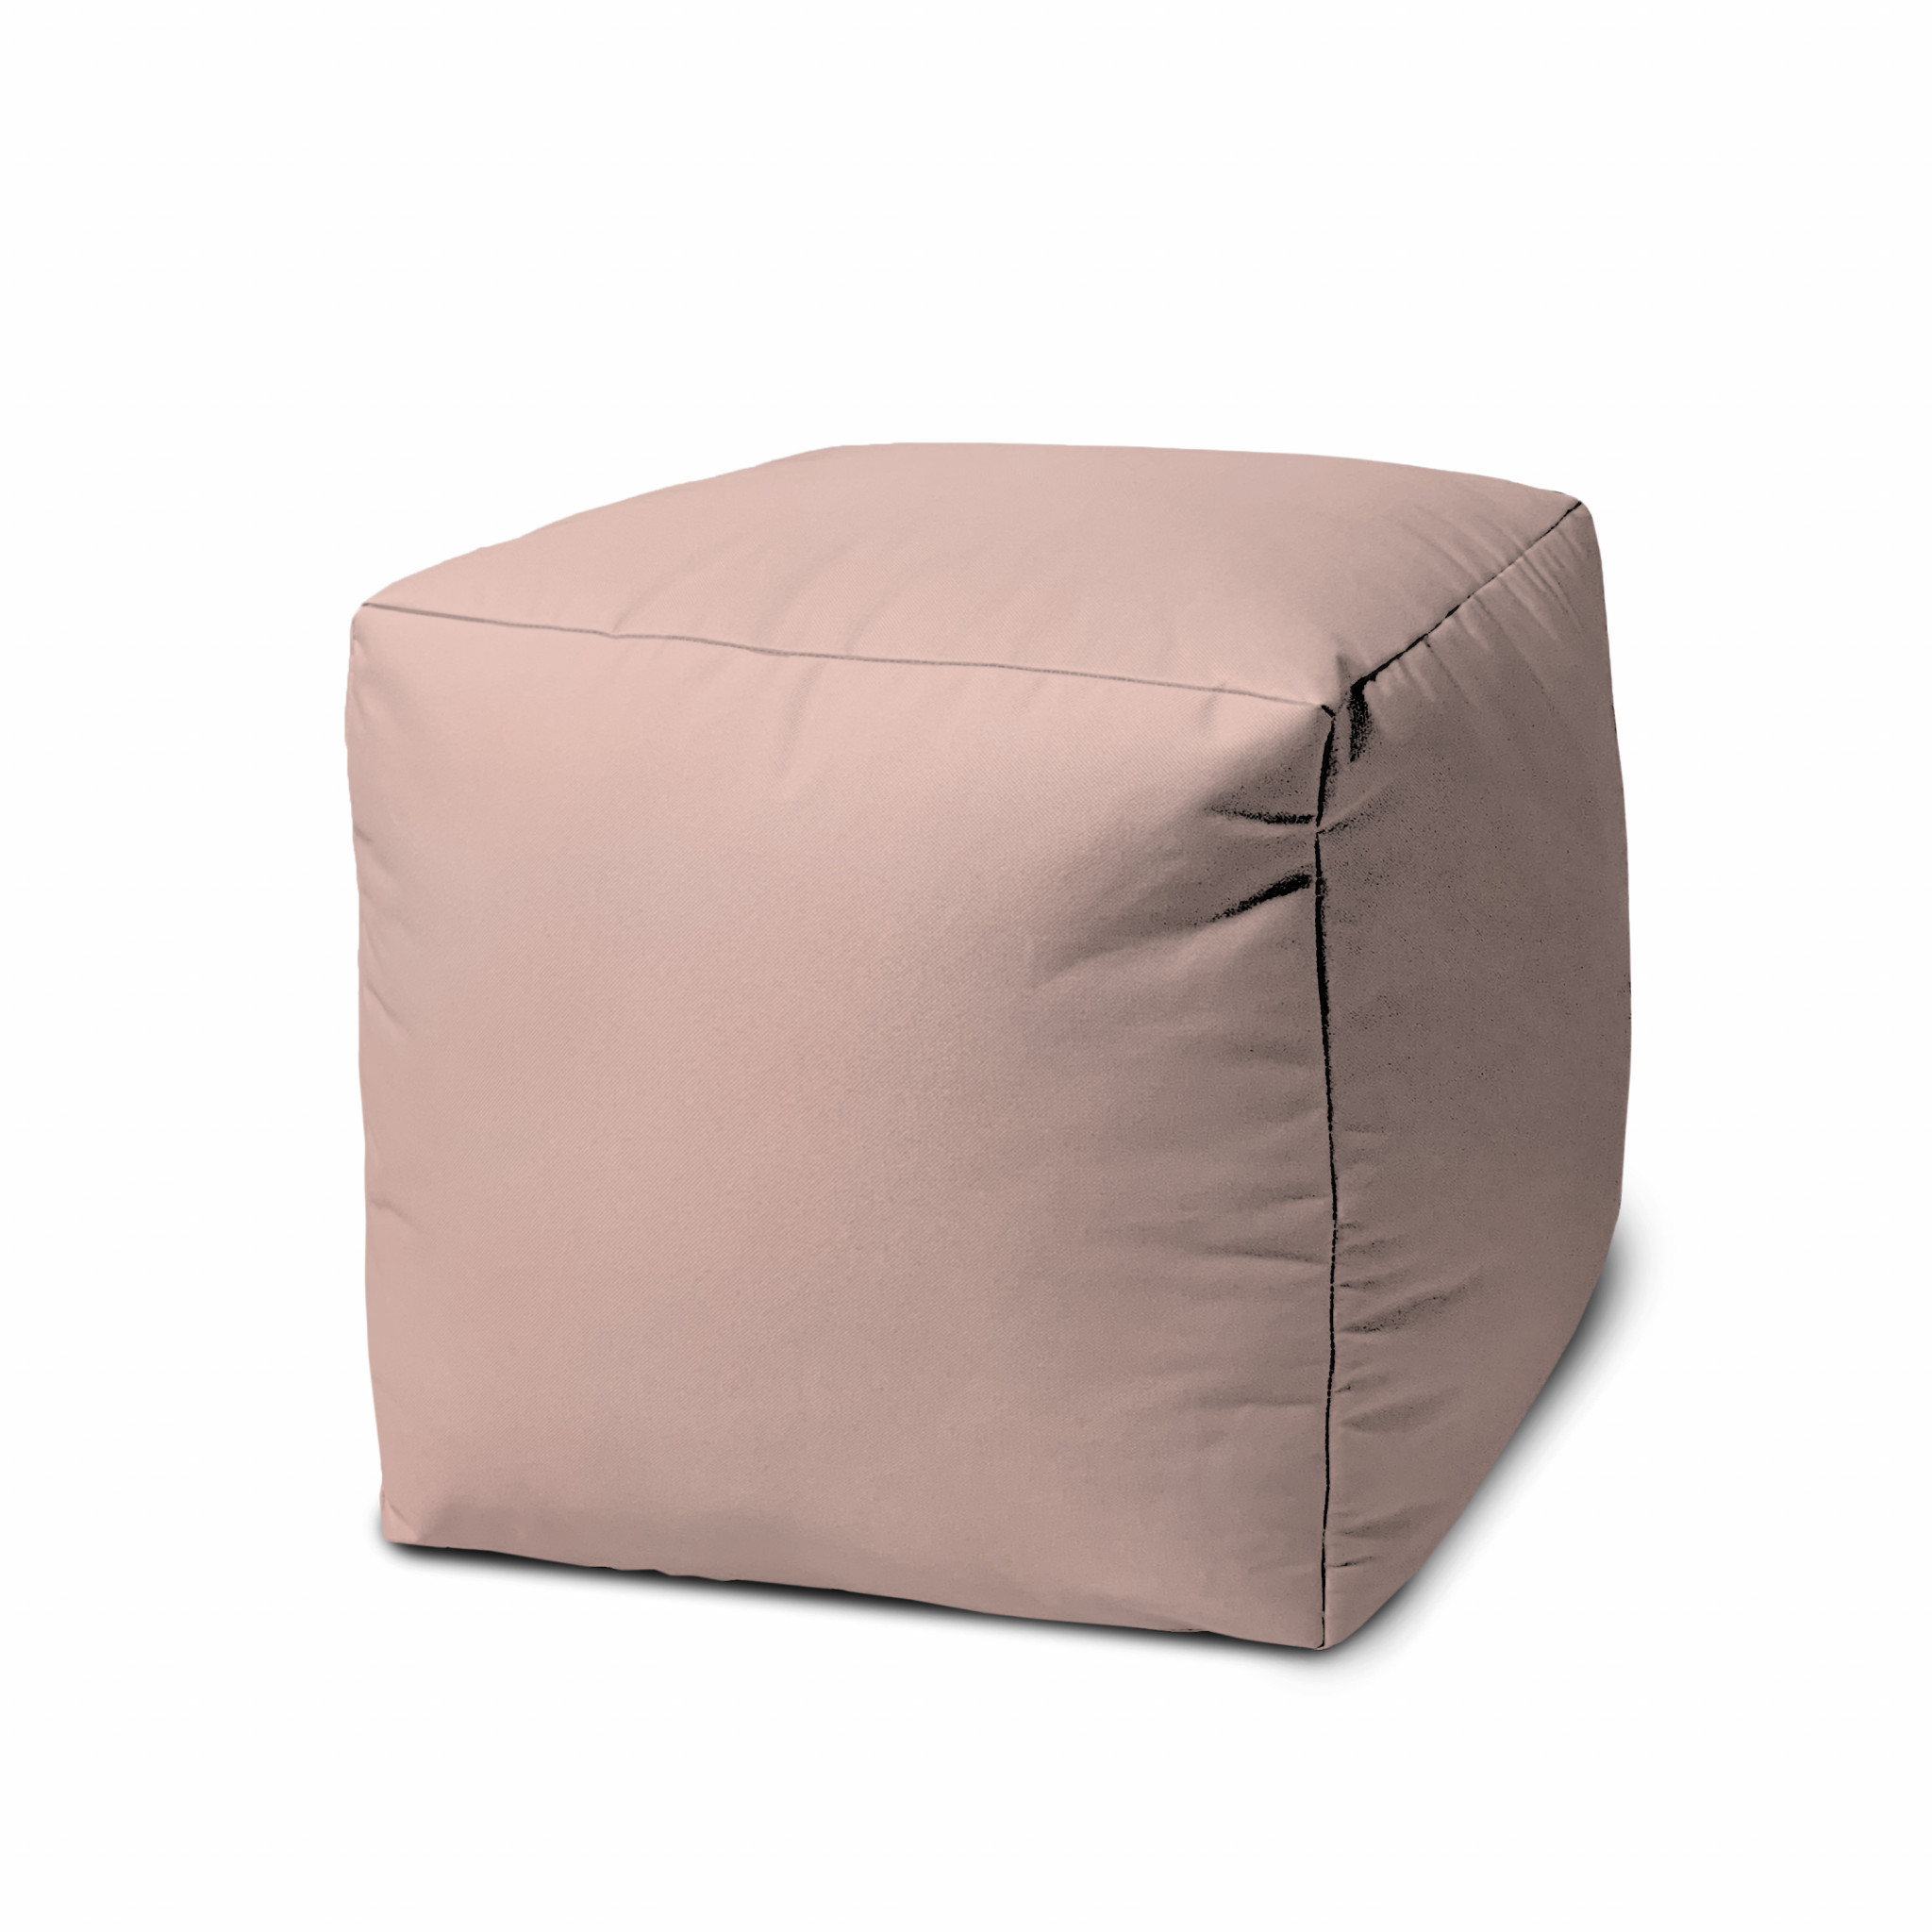 17 Cool Pale Pink Blush Solid Color Indoor Outdoor Pouf Cover